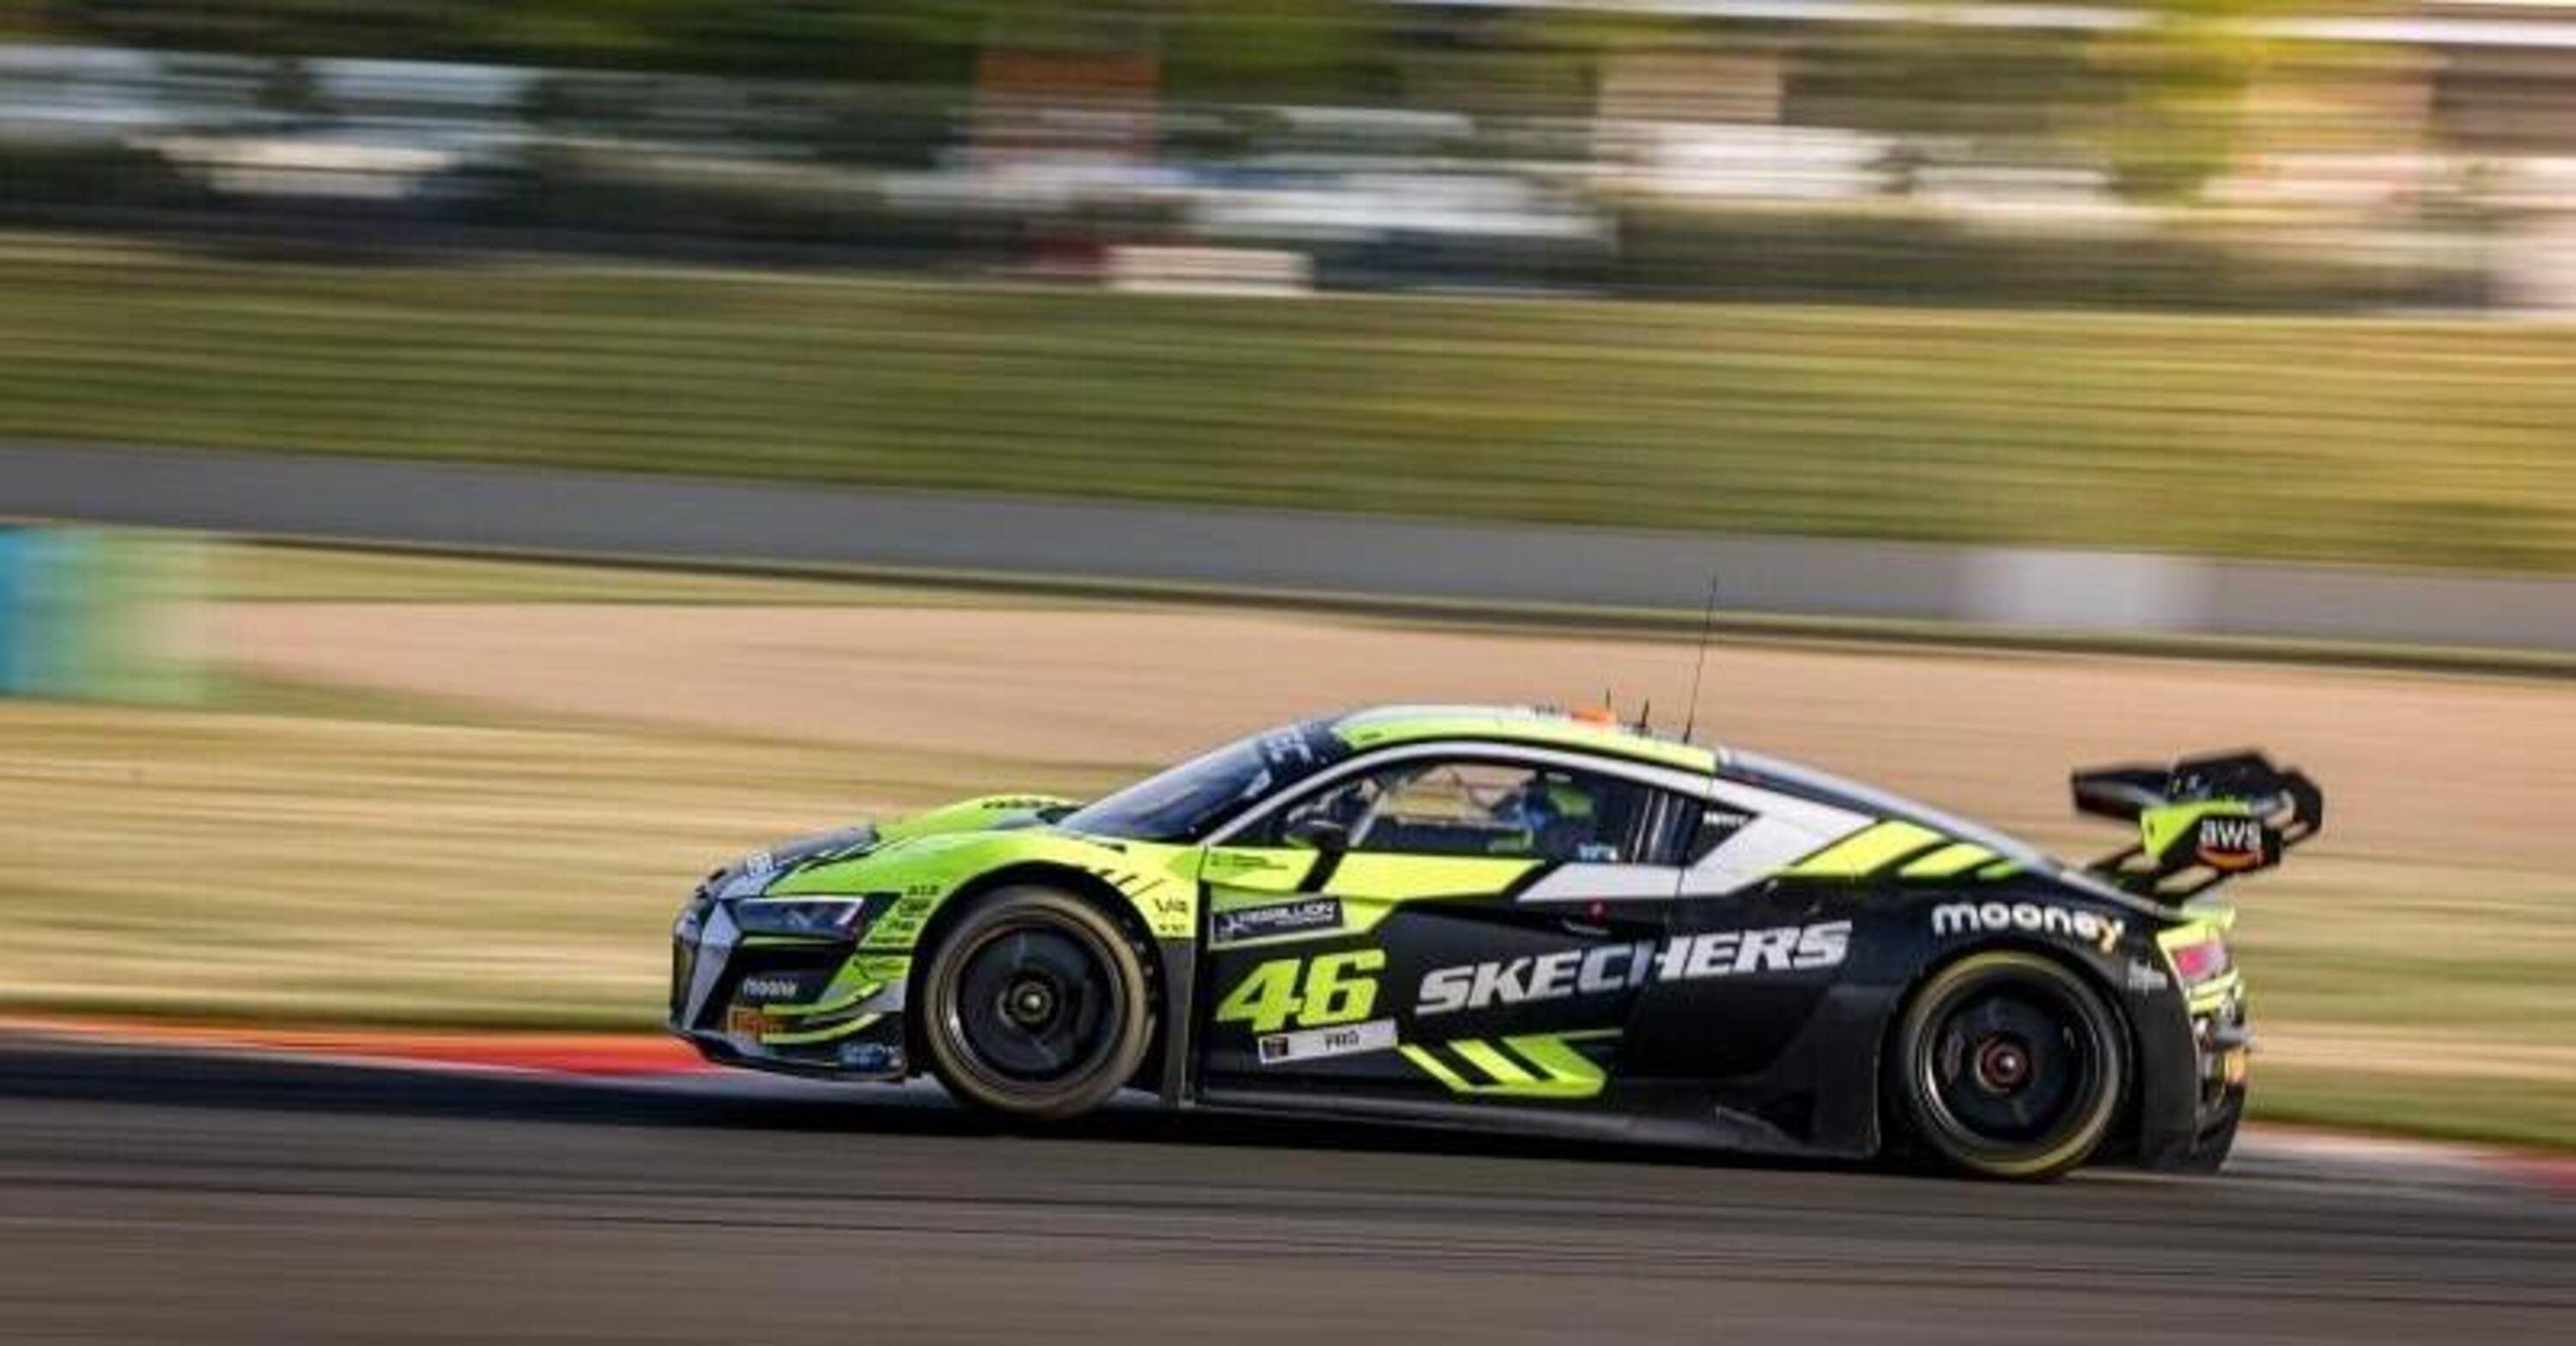 GTWCE, Magny-Cours, gara 1: vince Audi. Rossi quindicesimo